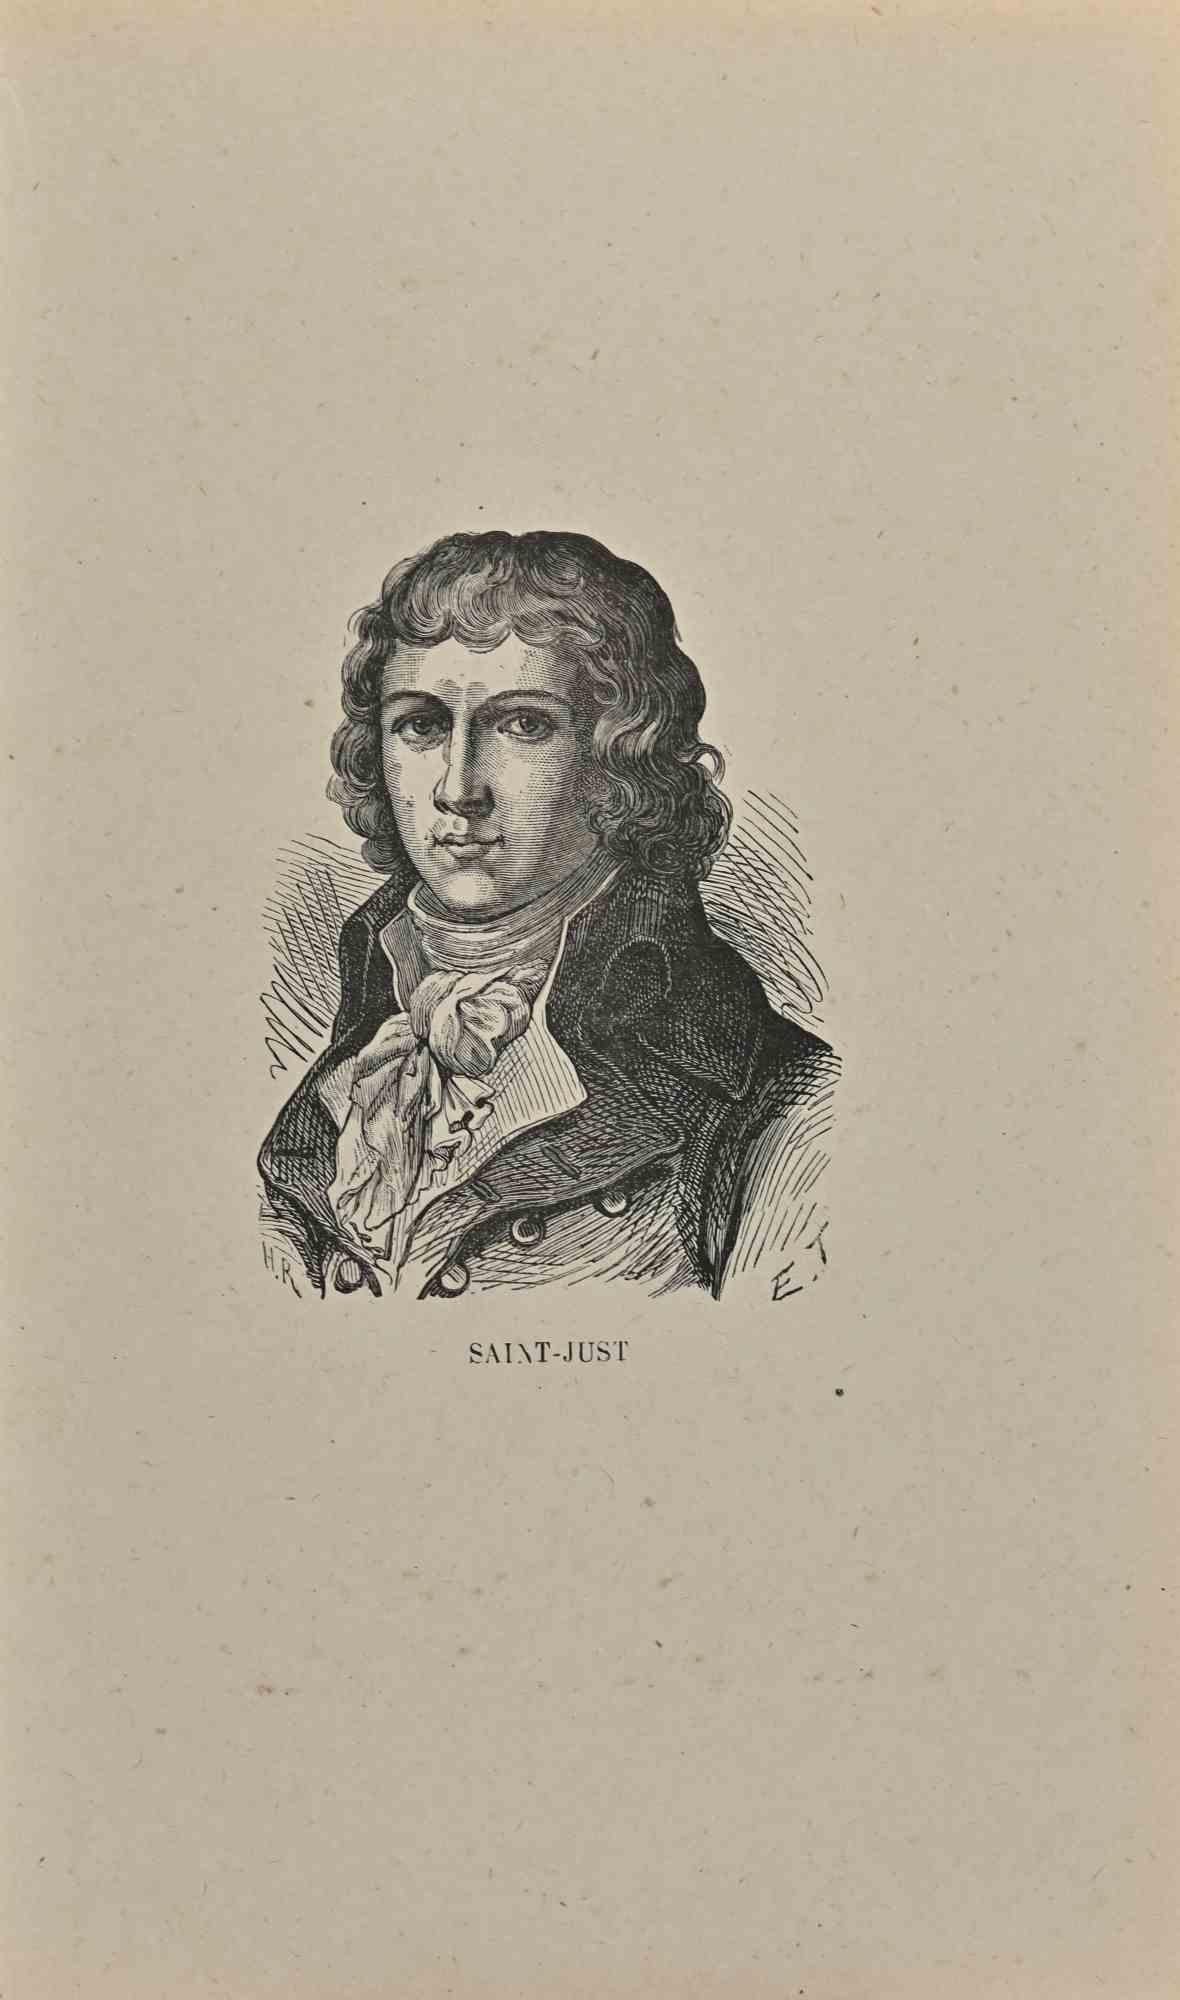 Portrait of Saint-Just - Lithograph - Early 19th century